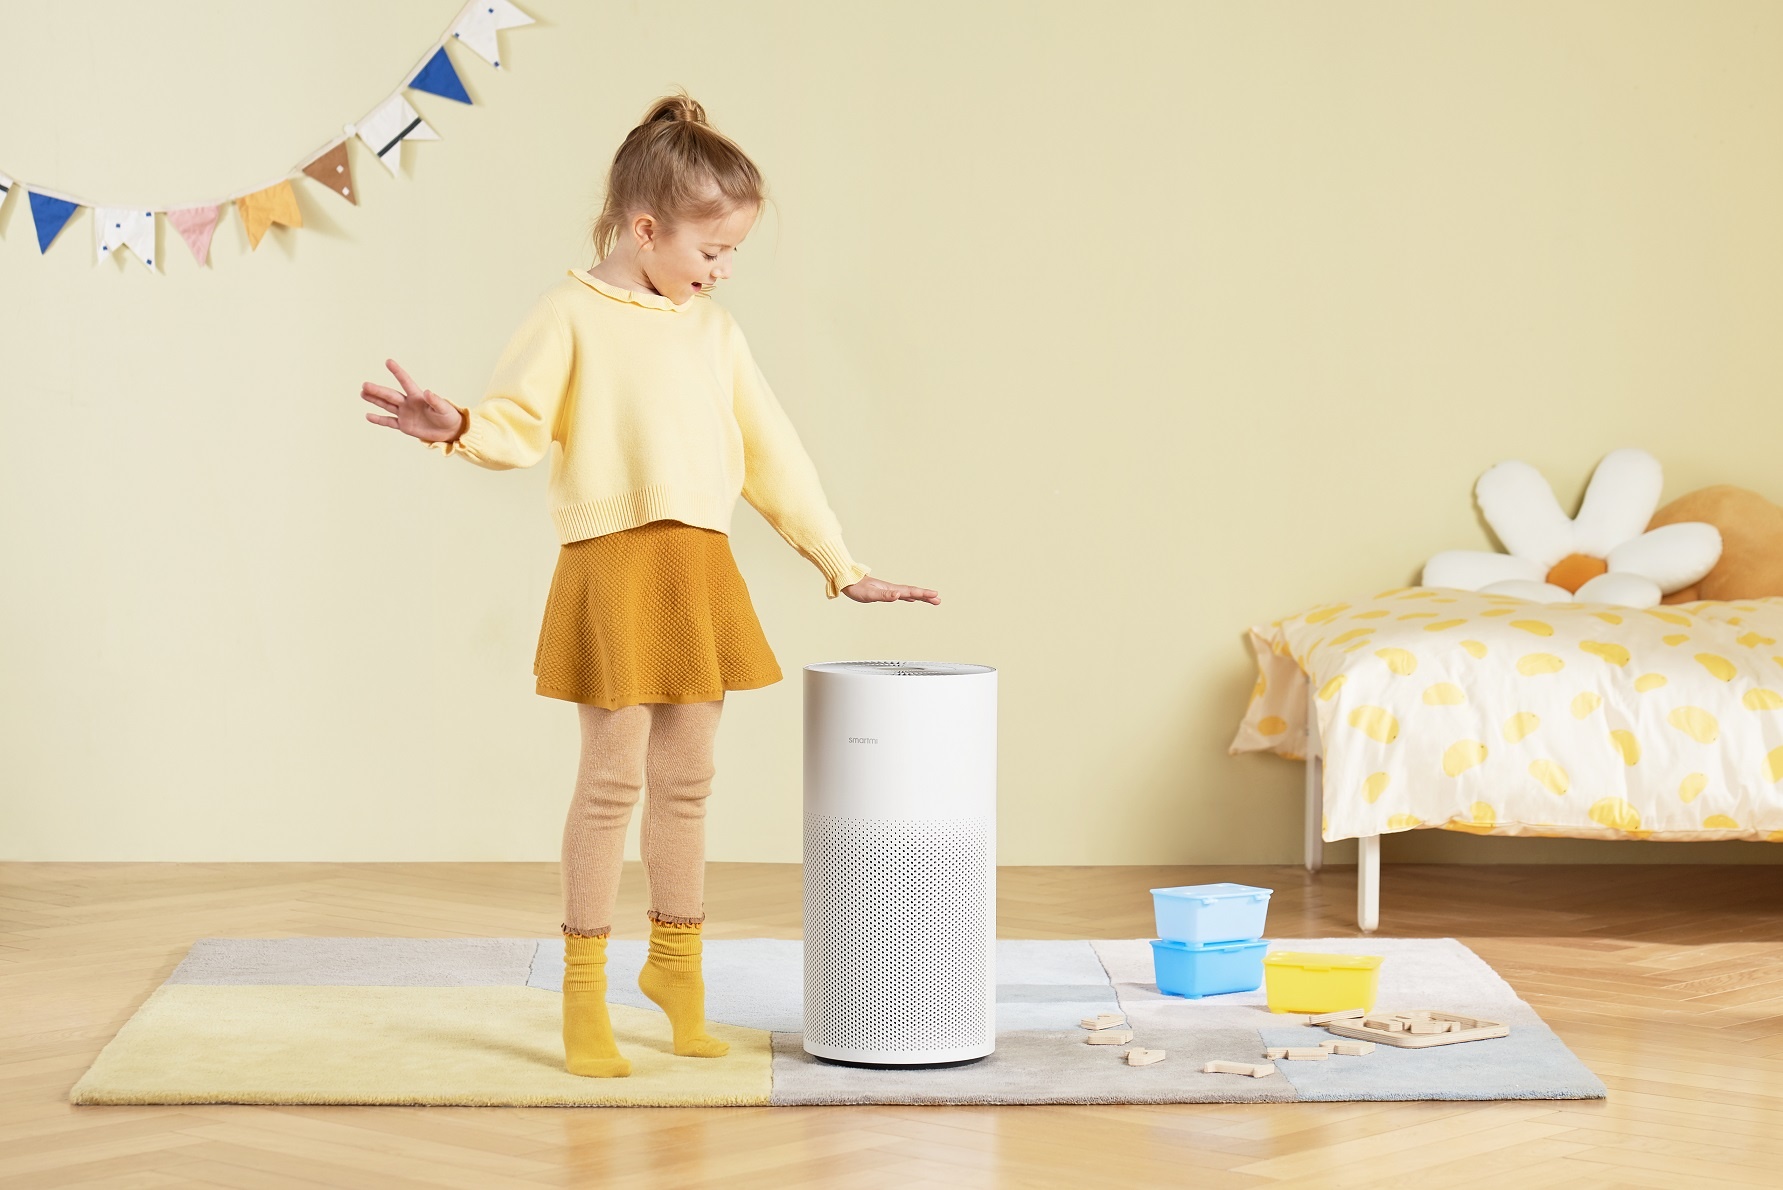 air purifier in kids room with girl standing next to it